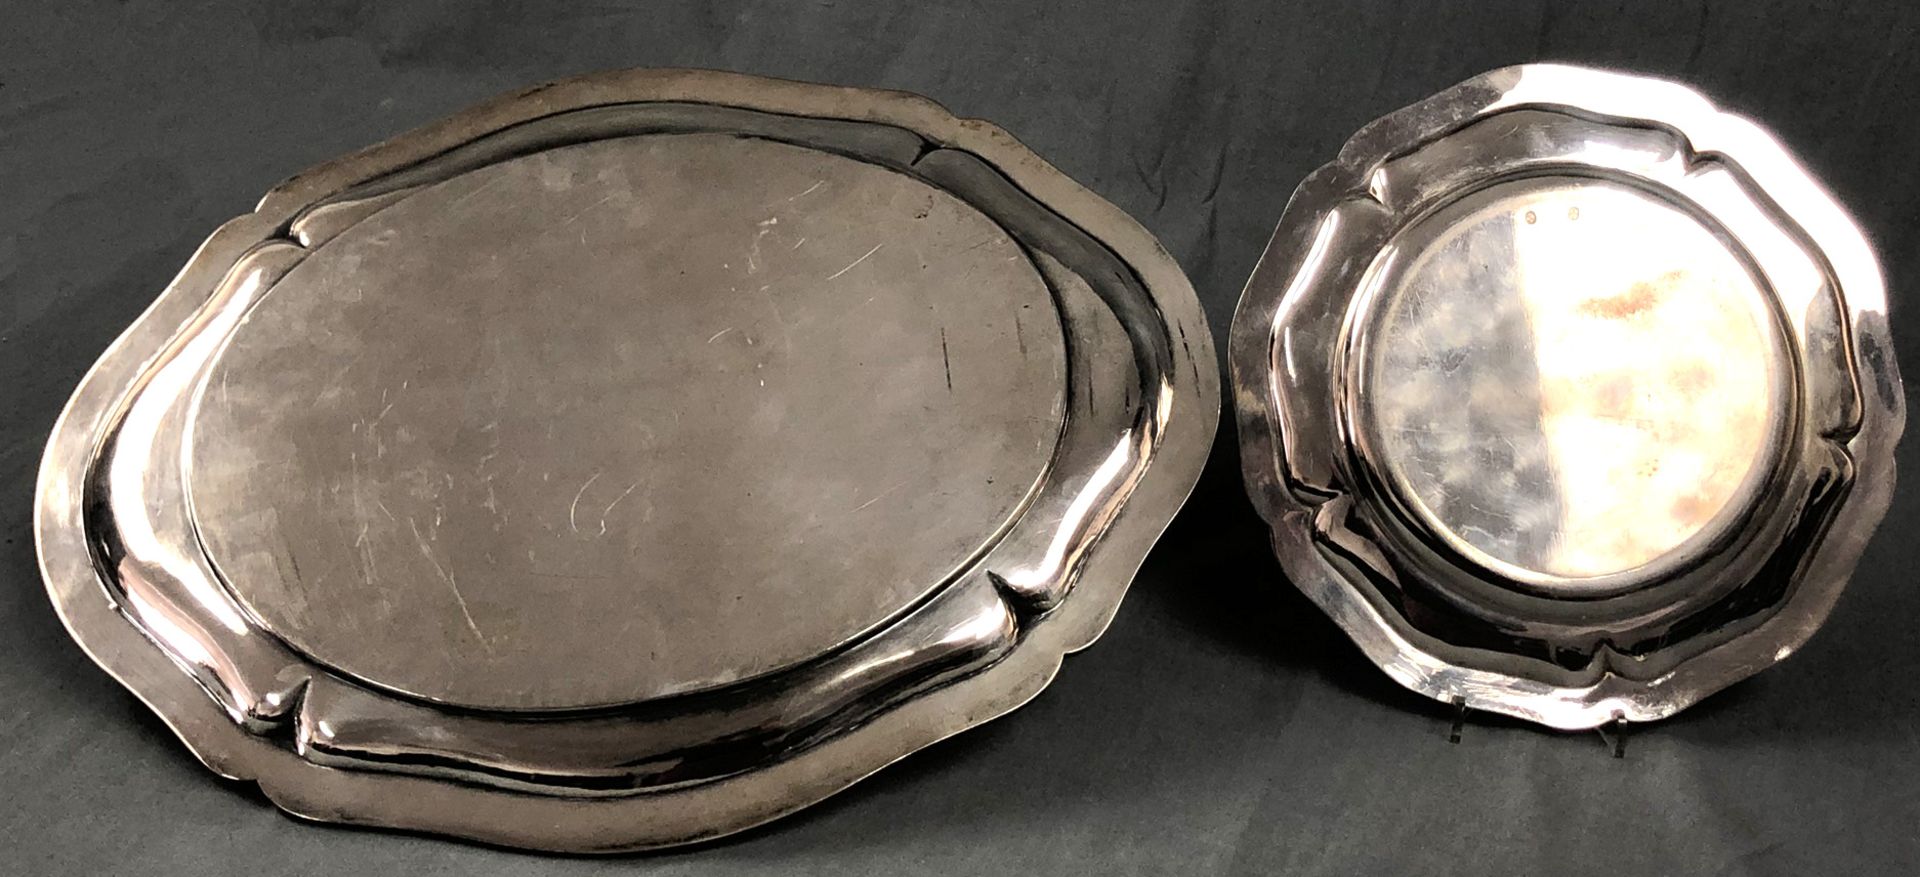 Large serving plate silver 835 and a plate silver 830.1738 grams. Up to 48.5 cm x 37.5 cm. - Bild 2 aus 5